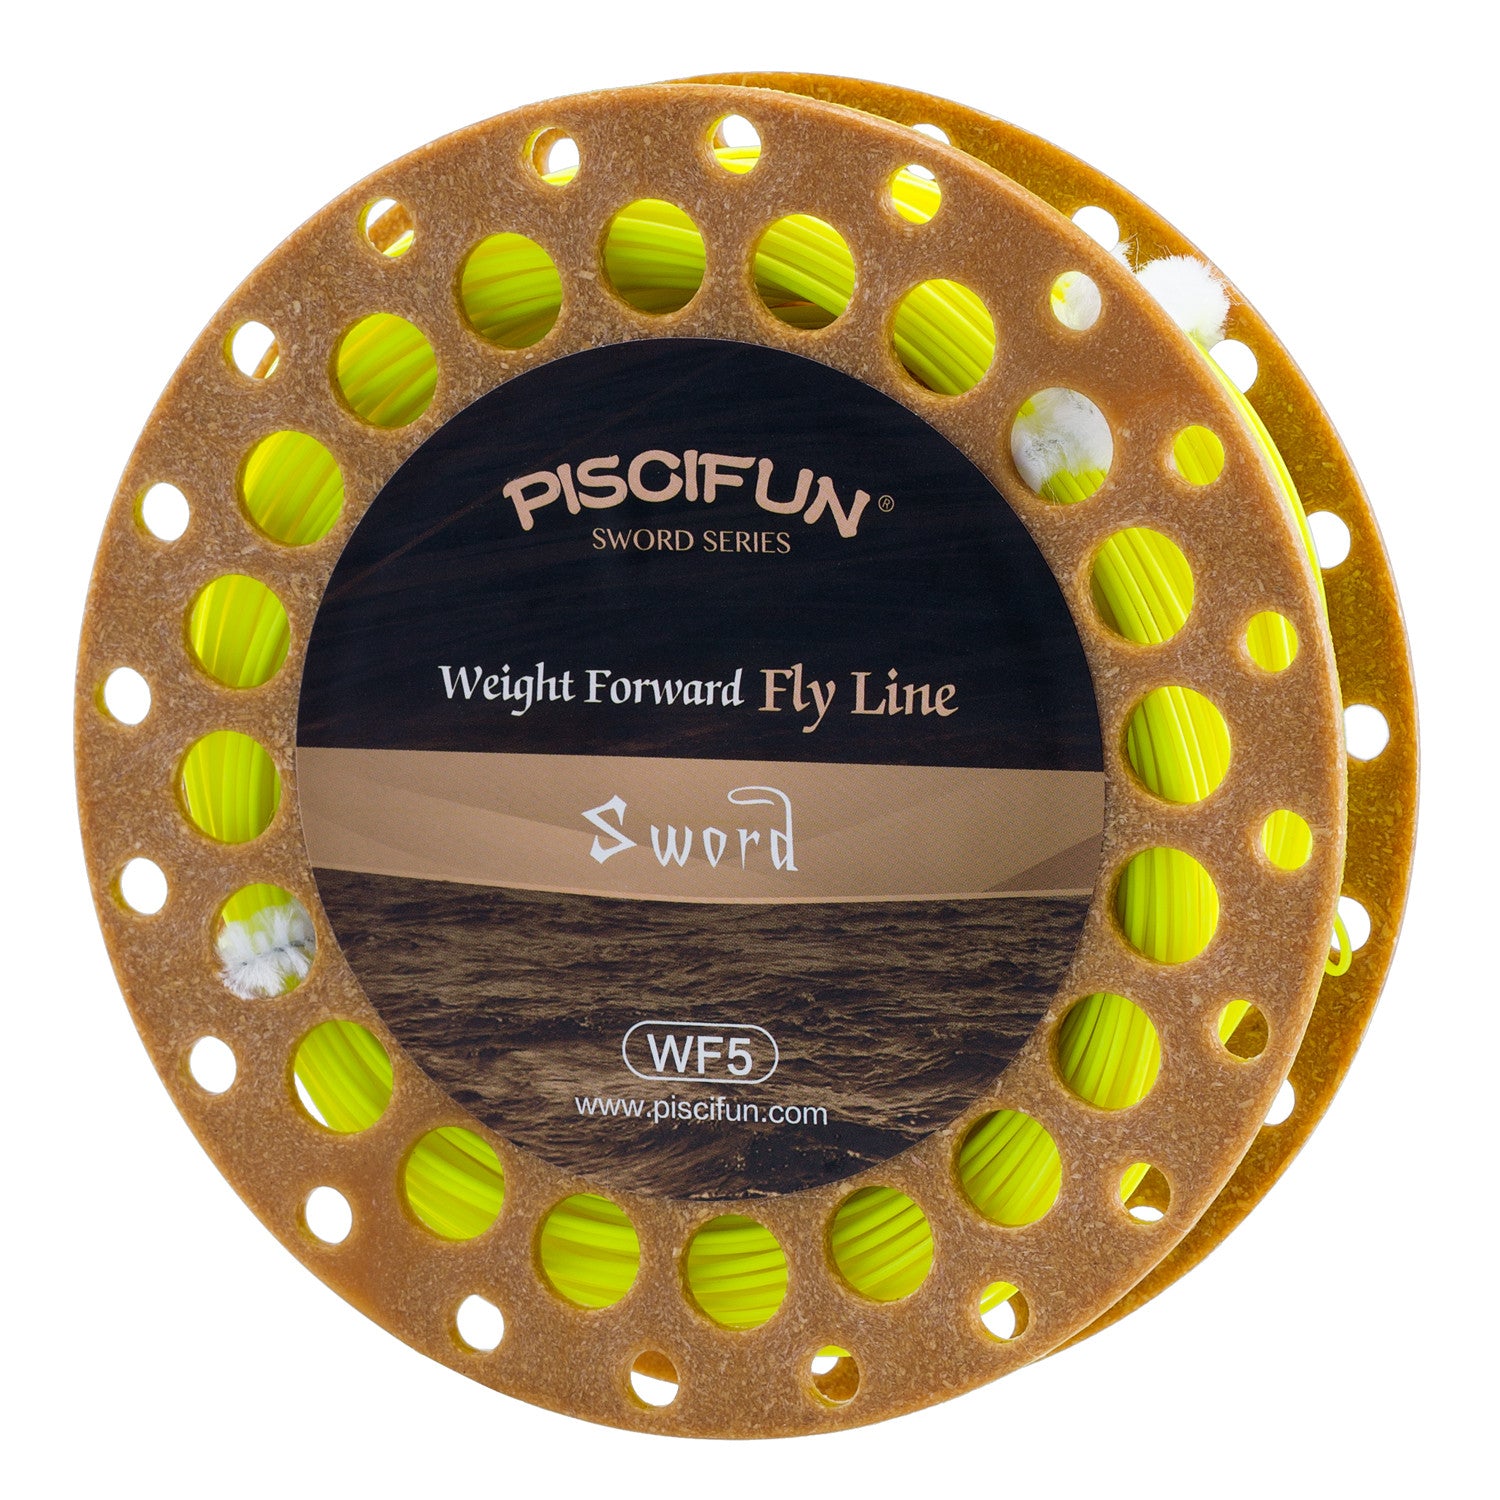 Angler Dream Gold Fly Line 90ft Weight Forward Floating 9wt Fly Fishing Line